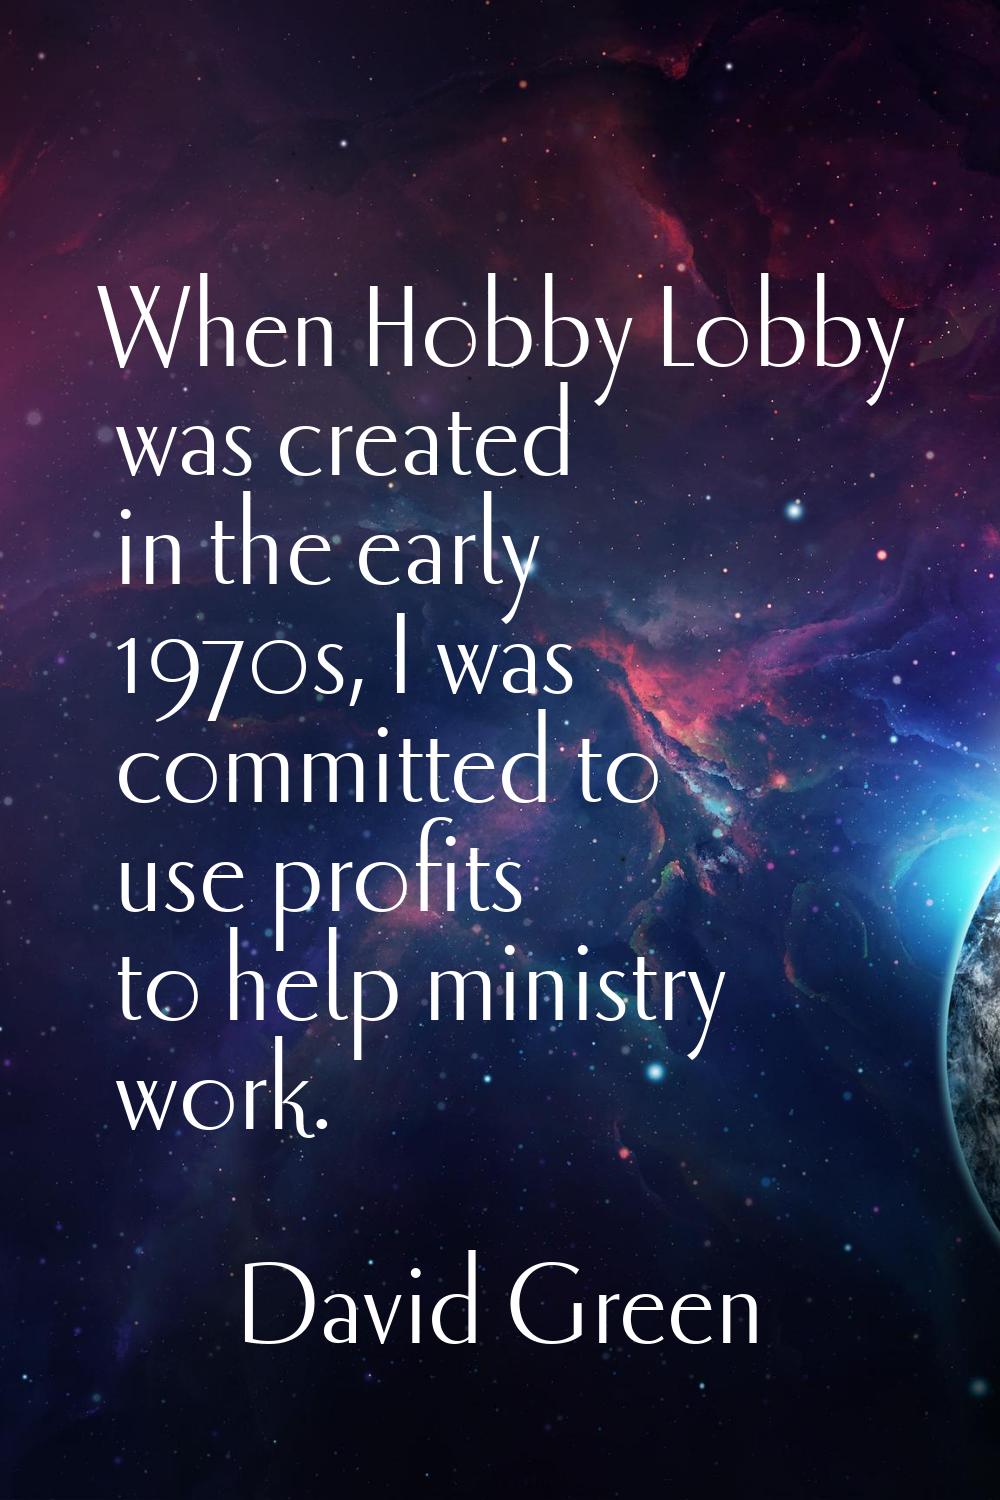 When Hobby Lobby was created in the early 1970s, I was committed to use profits to help ministry wo